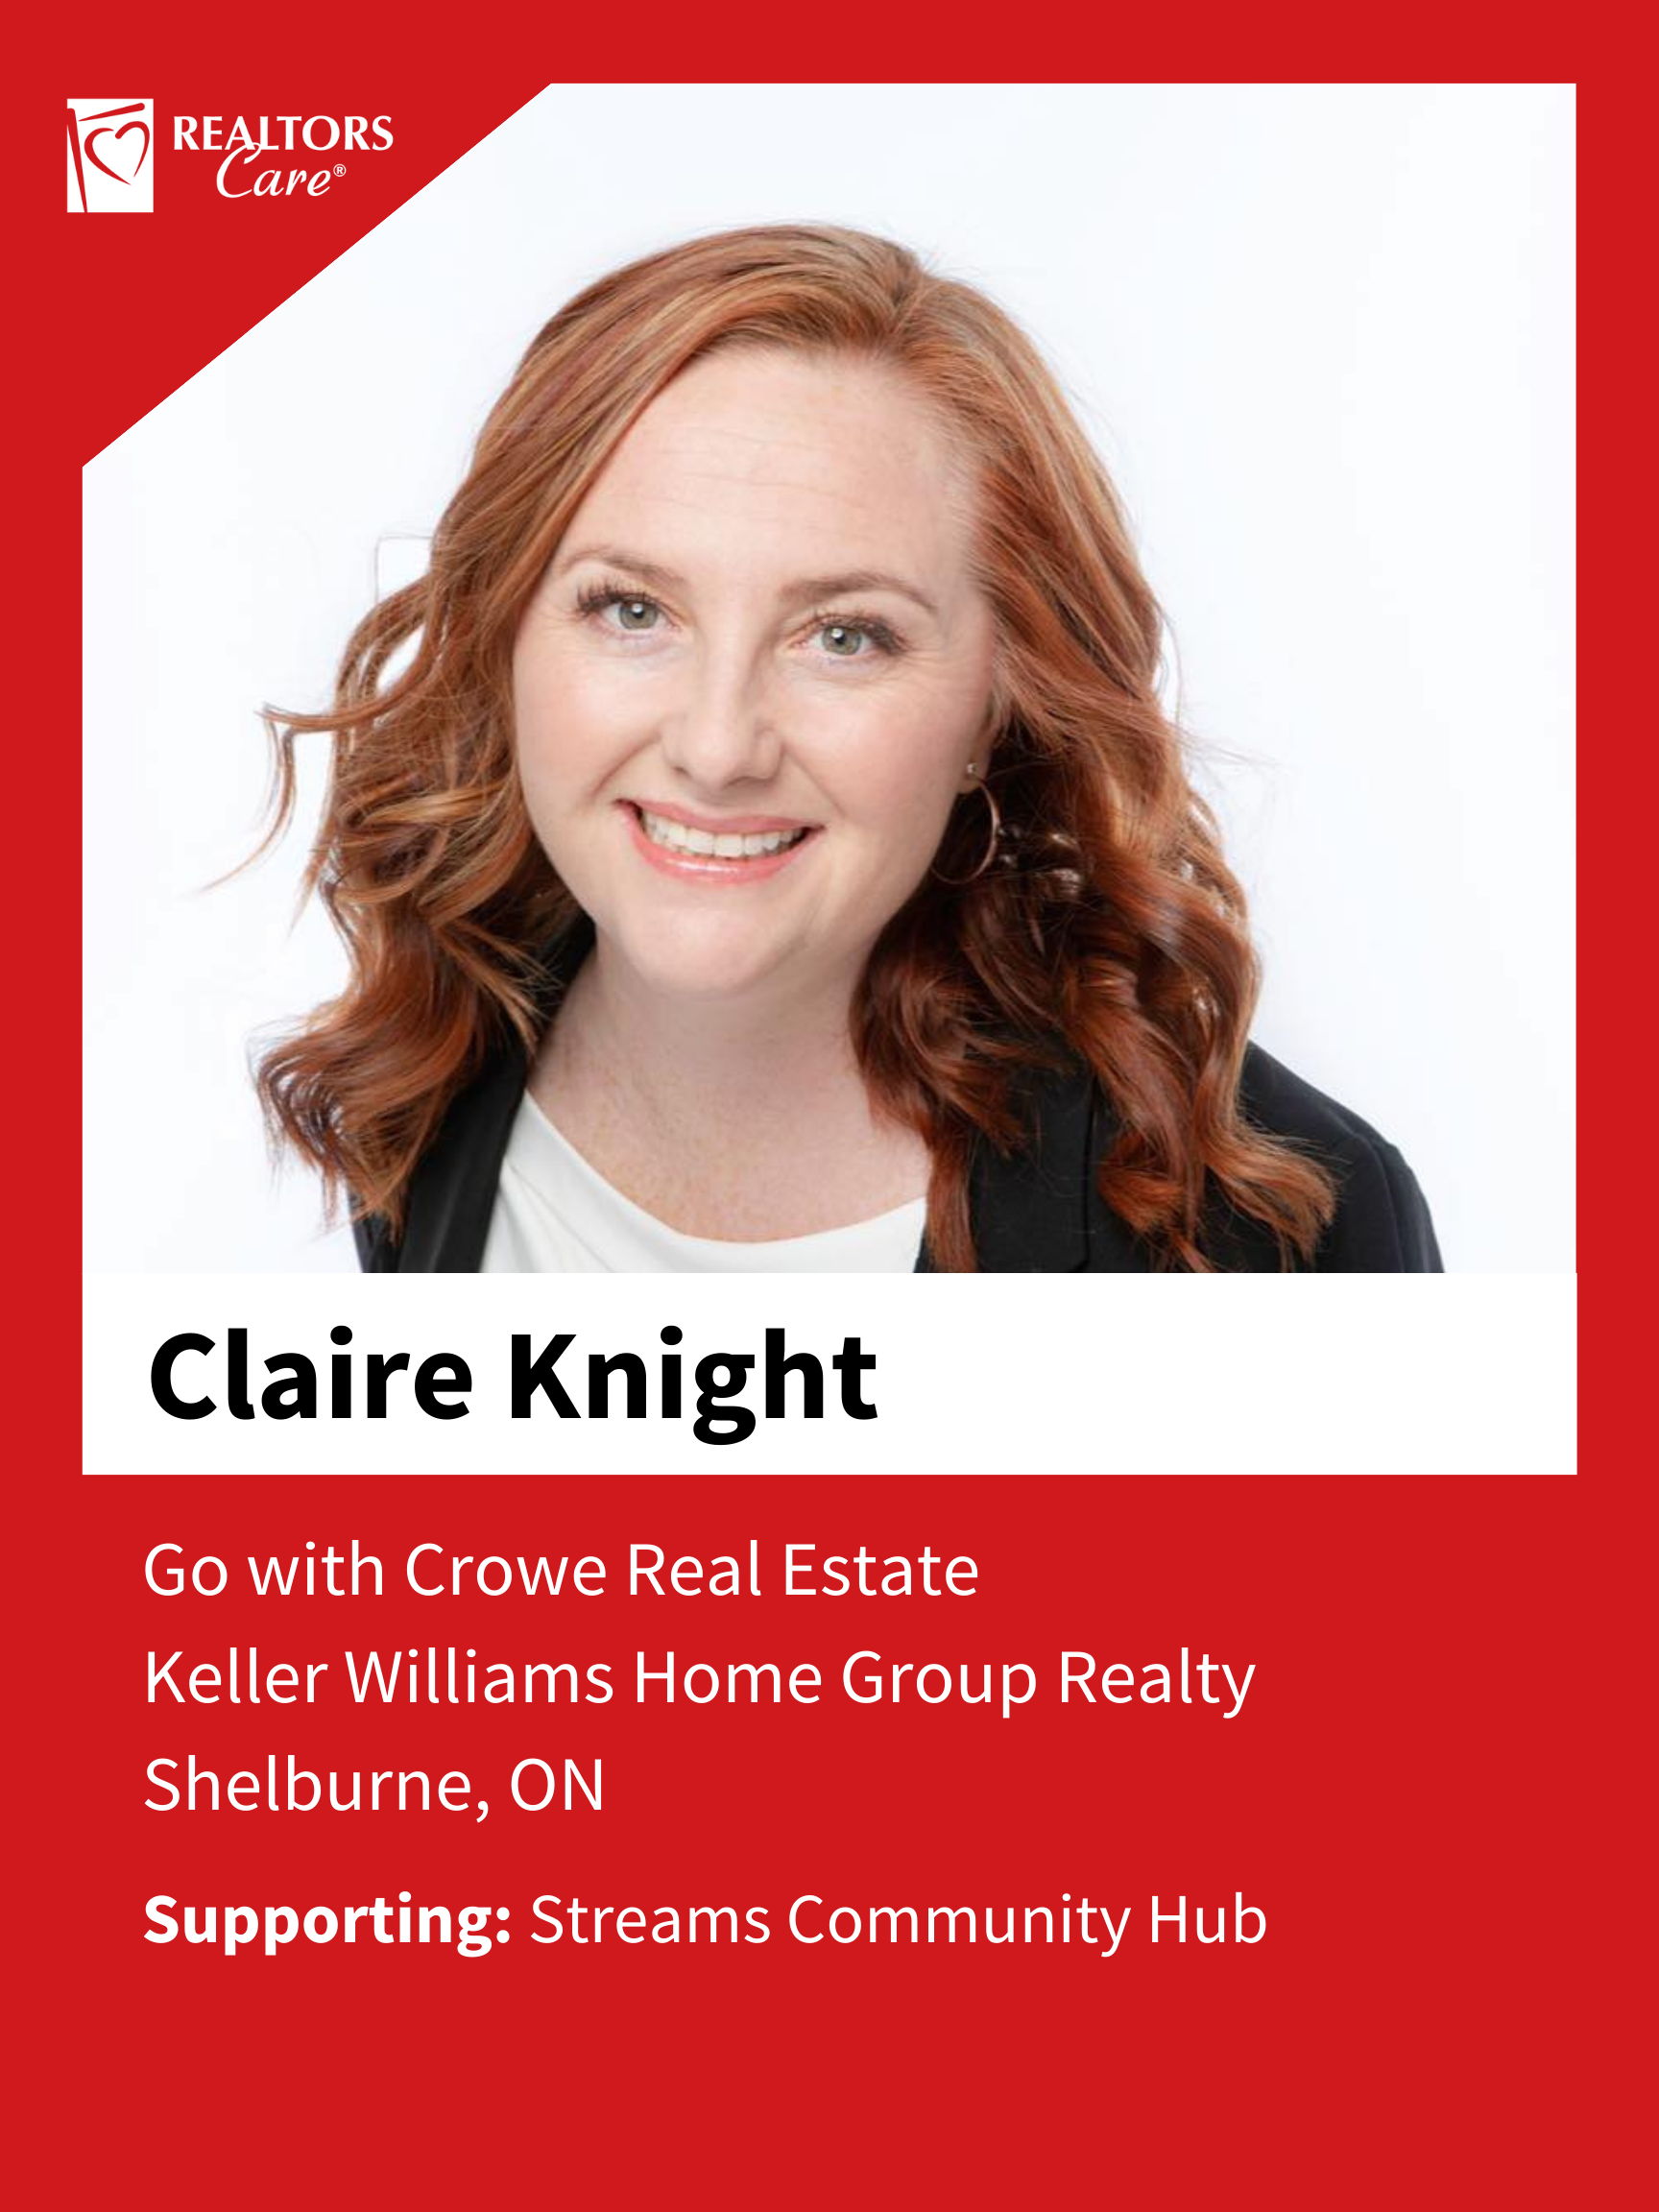 Claire Knight
Shelburne	ON
